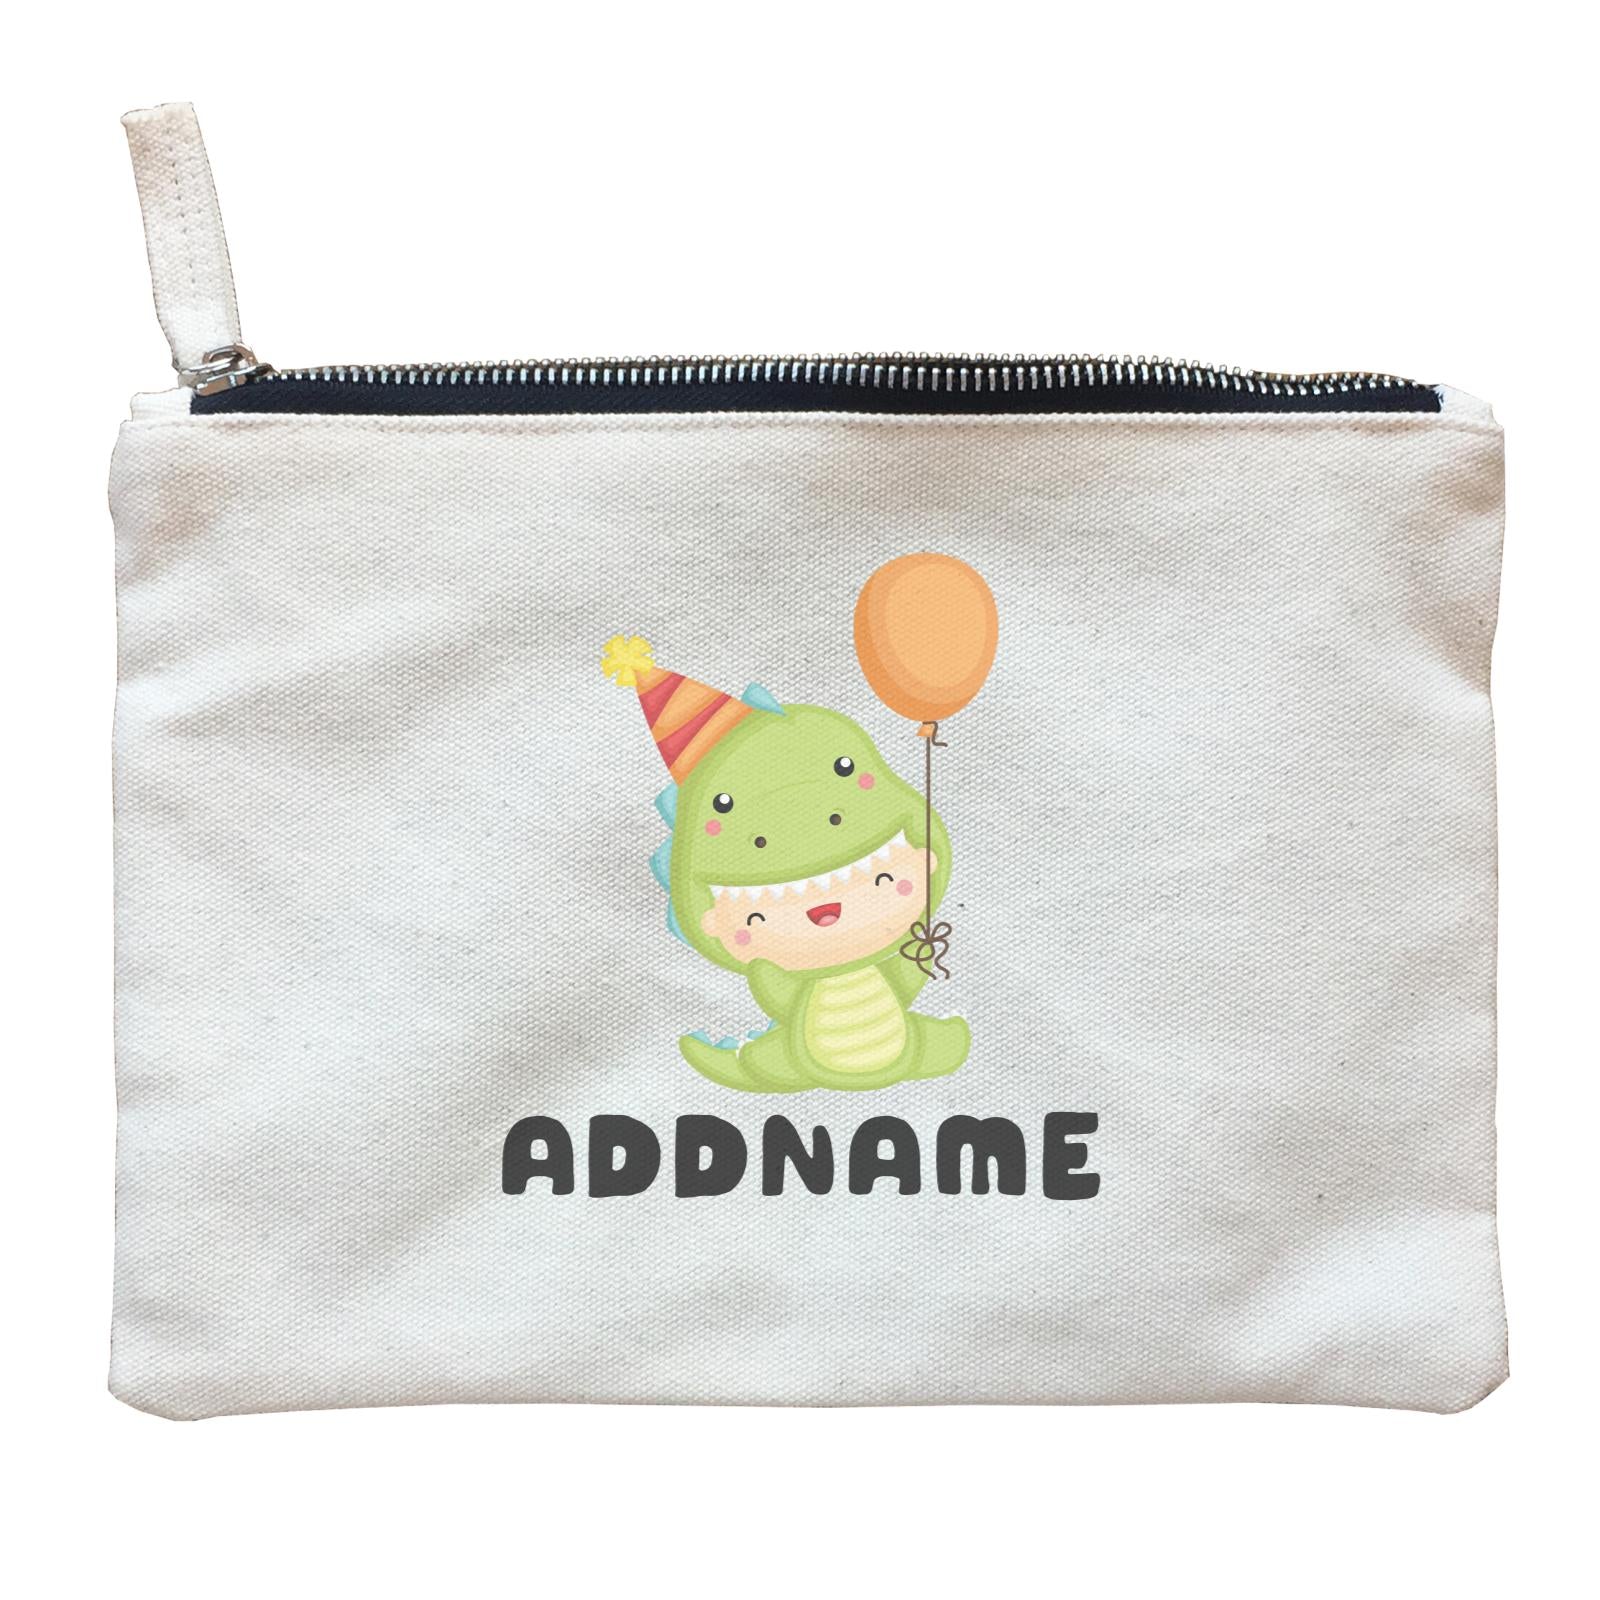 Birthday Dinosaur Happy Baby Wearing Dinosaur Suit And Party Hat Addname Zipper Pouch